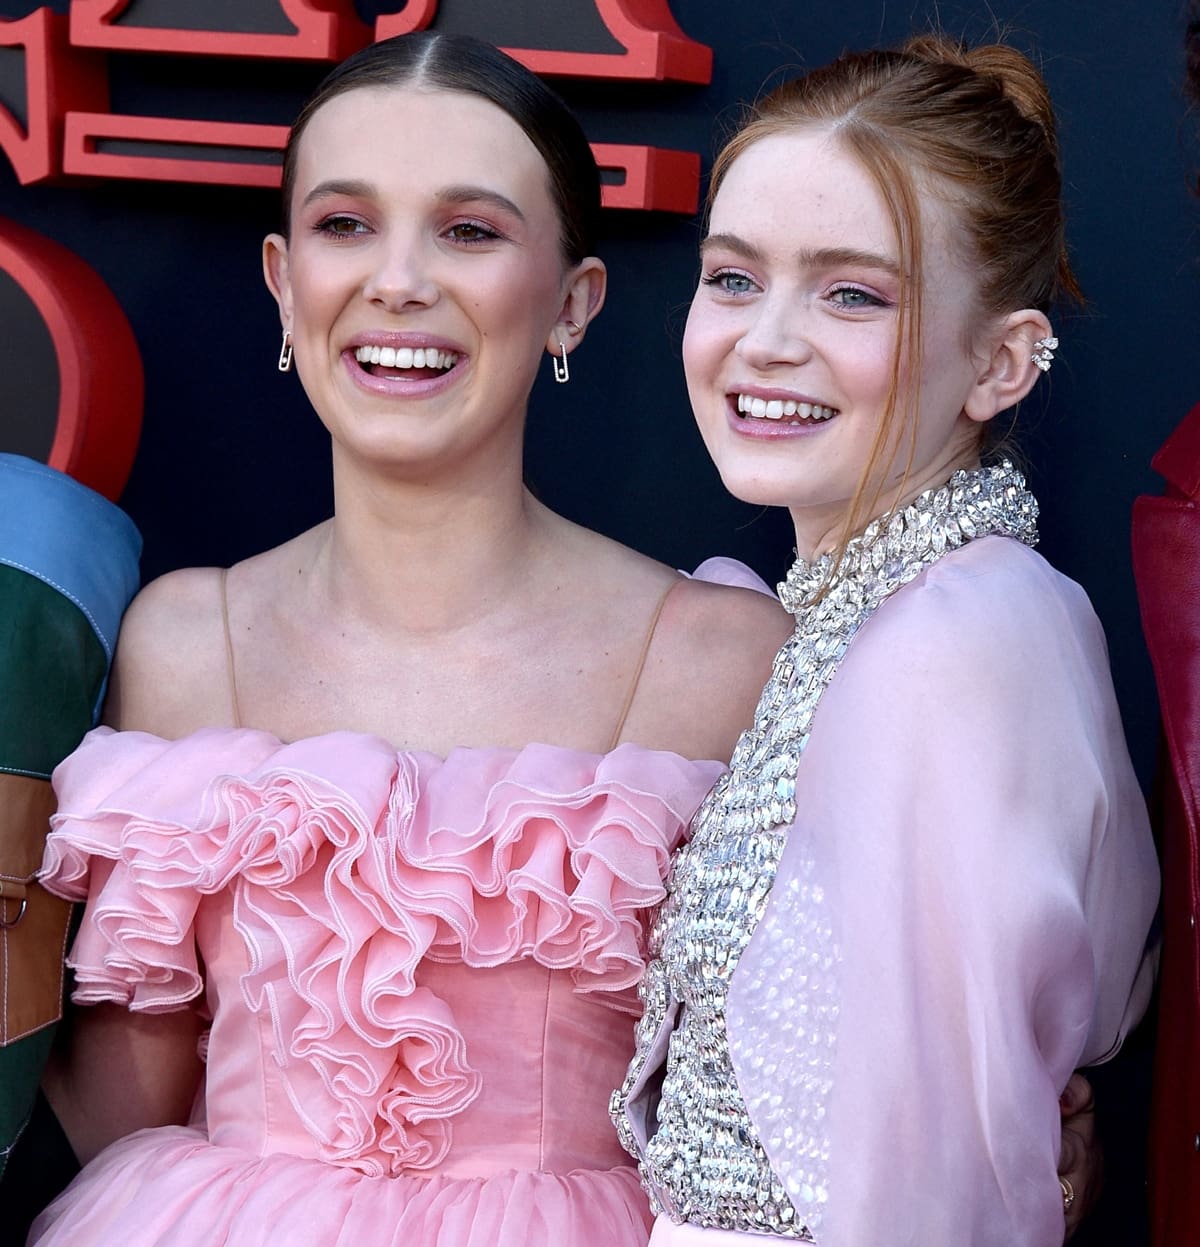 Millie Bobby Brown and Sadie Sink flash their pearly white teeth on the red carpet